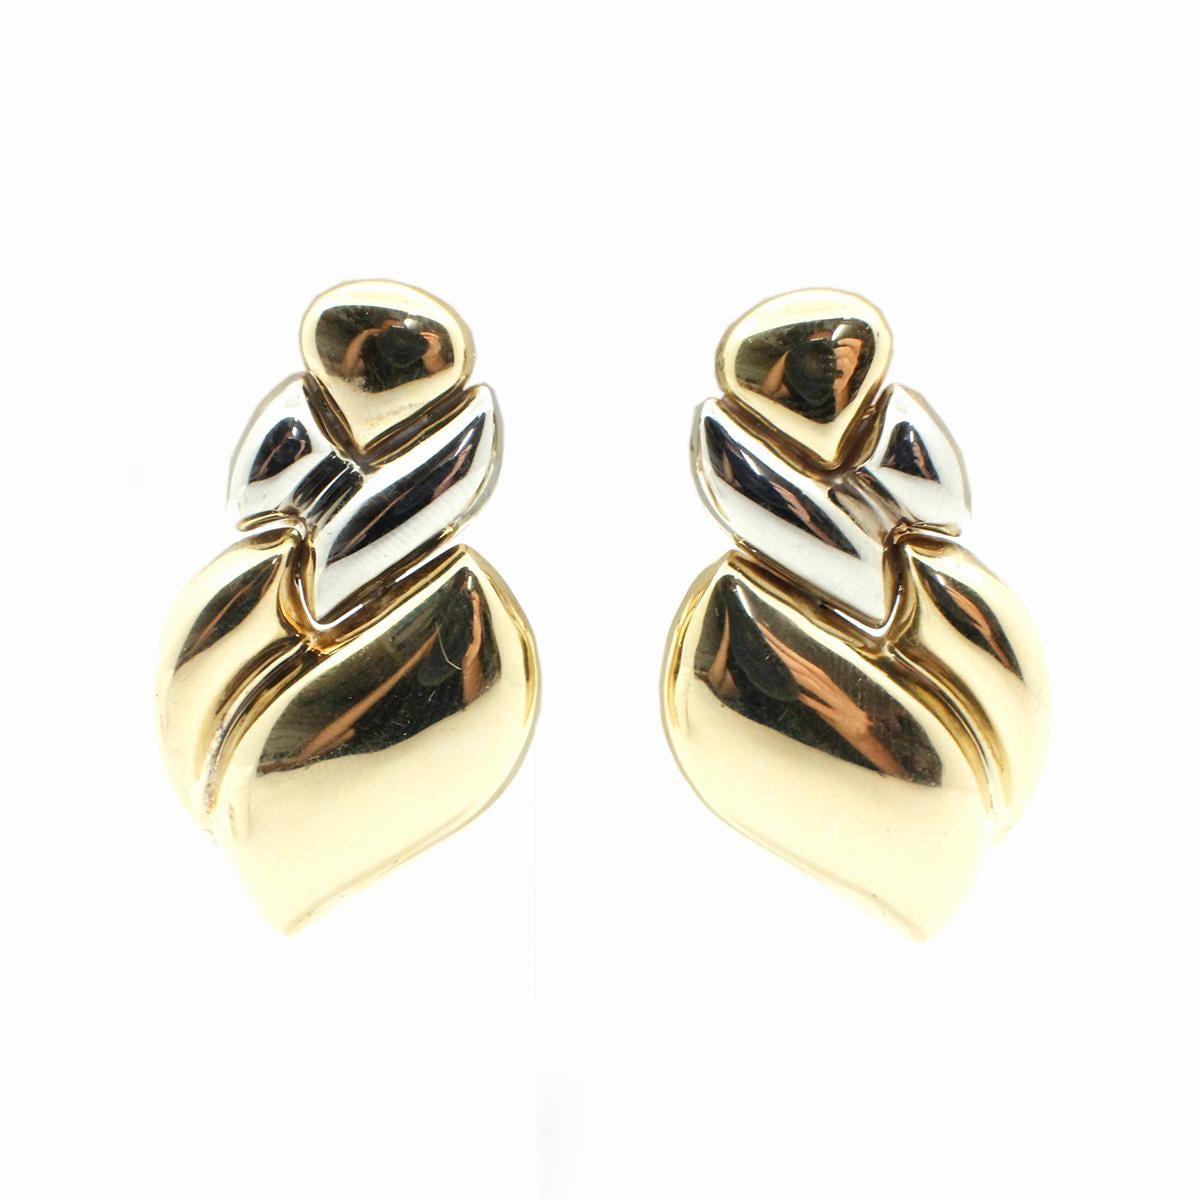 These sensational earrings are made in 18k two-tone gold by designer Chimento. These earring fold when the white and yellow gold meet to make the earrings more flexible and easy to wear. Set with standard posts, and omega clips make these earrings